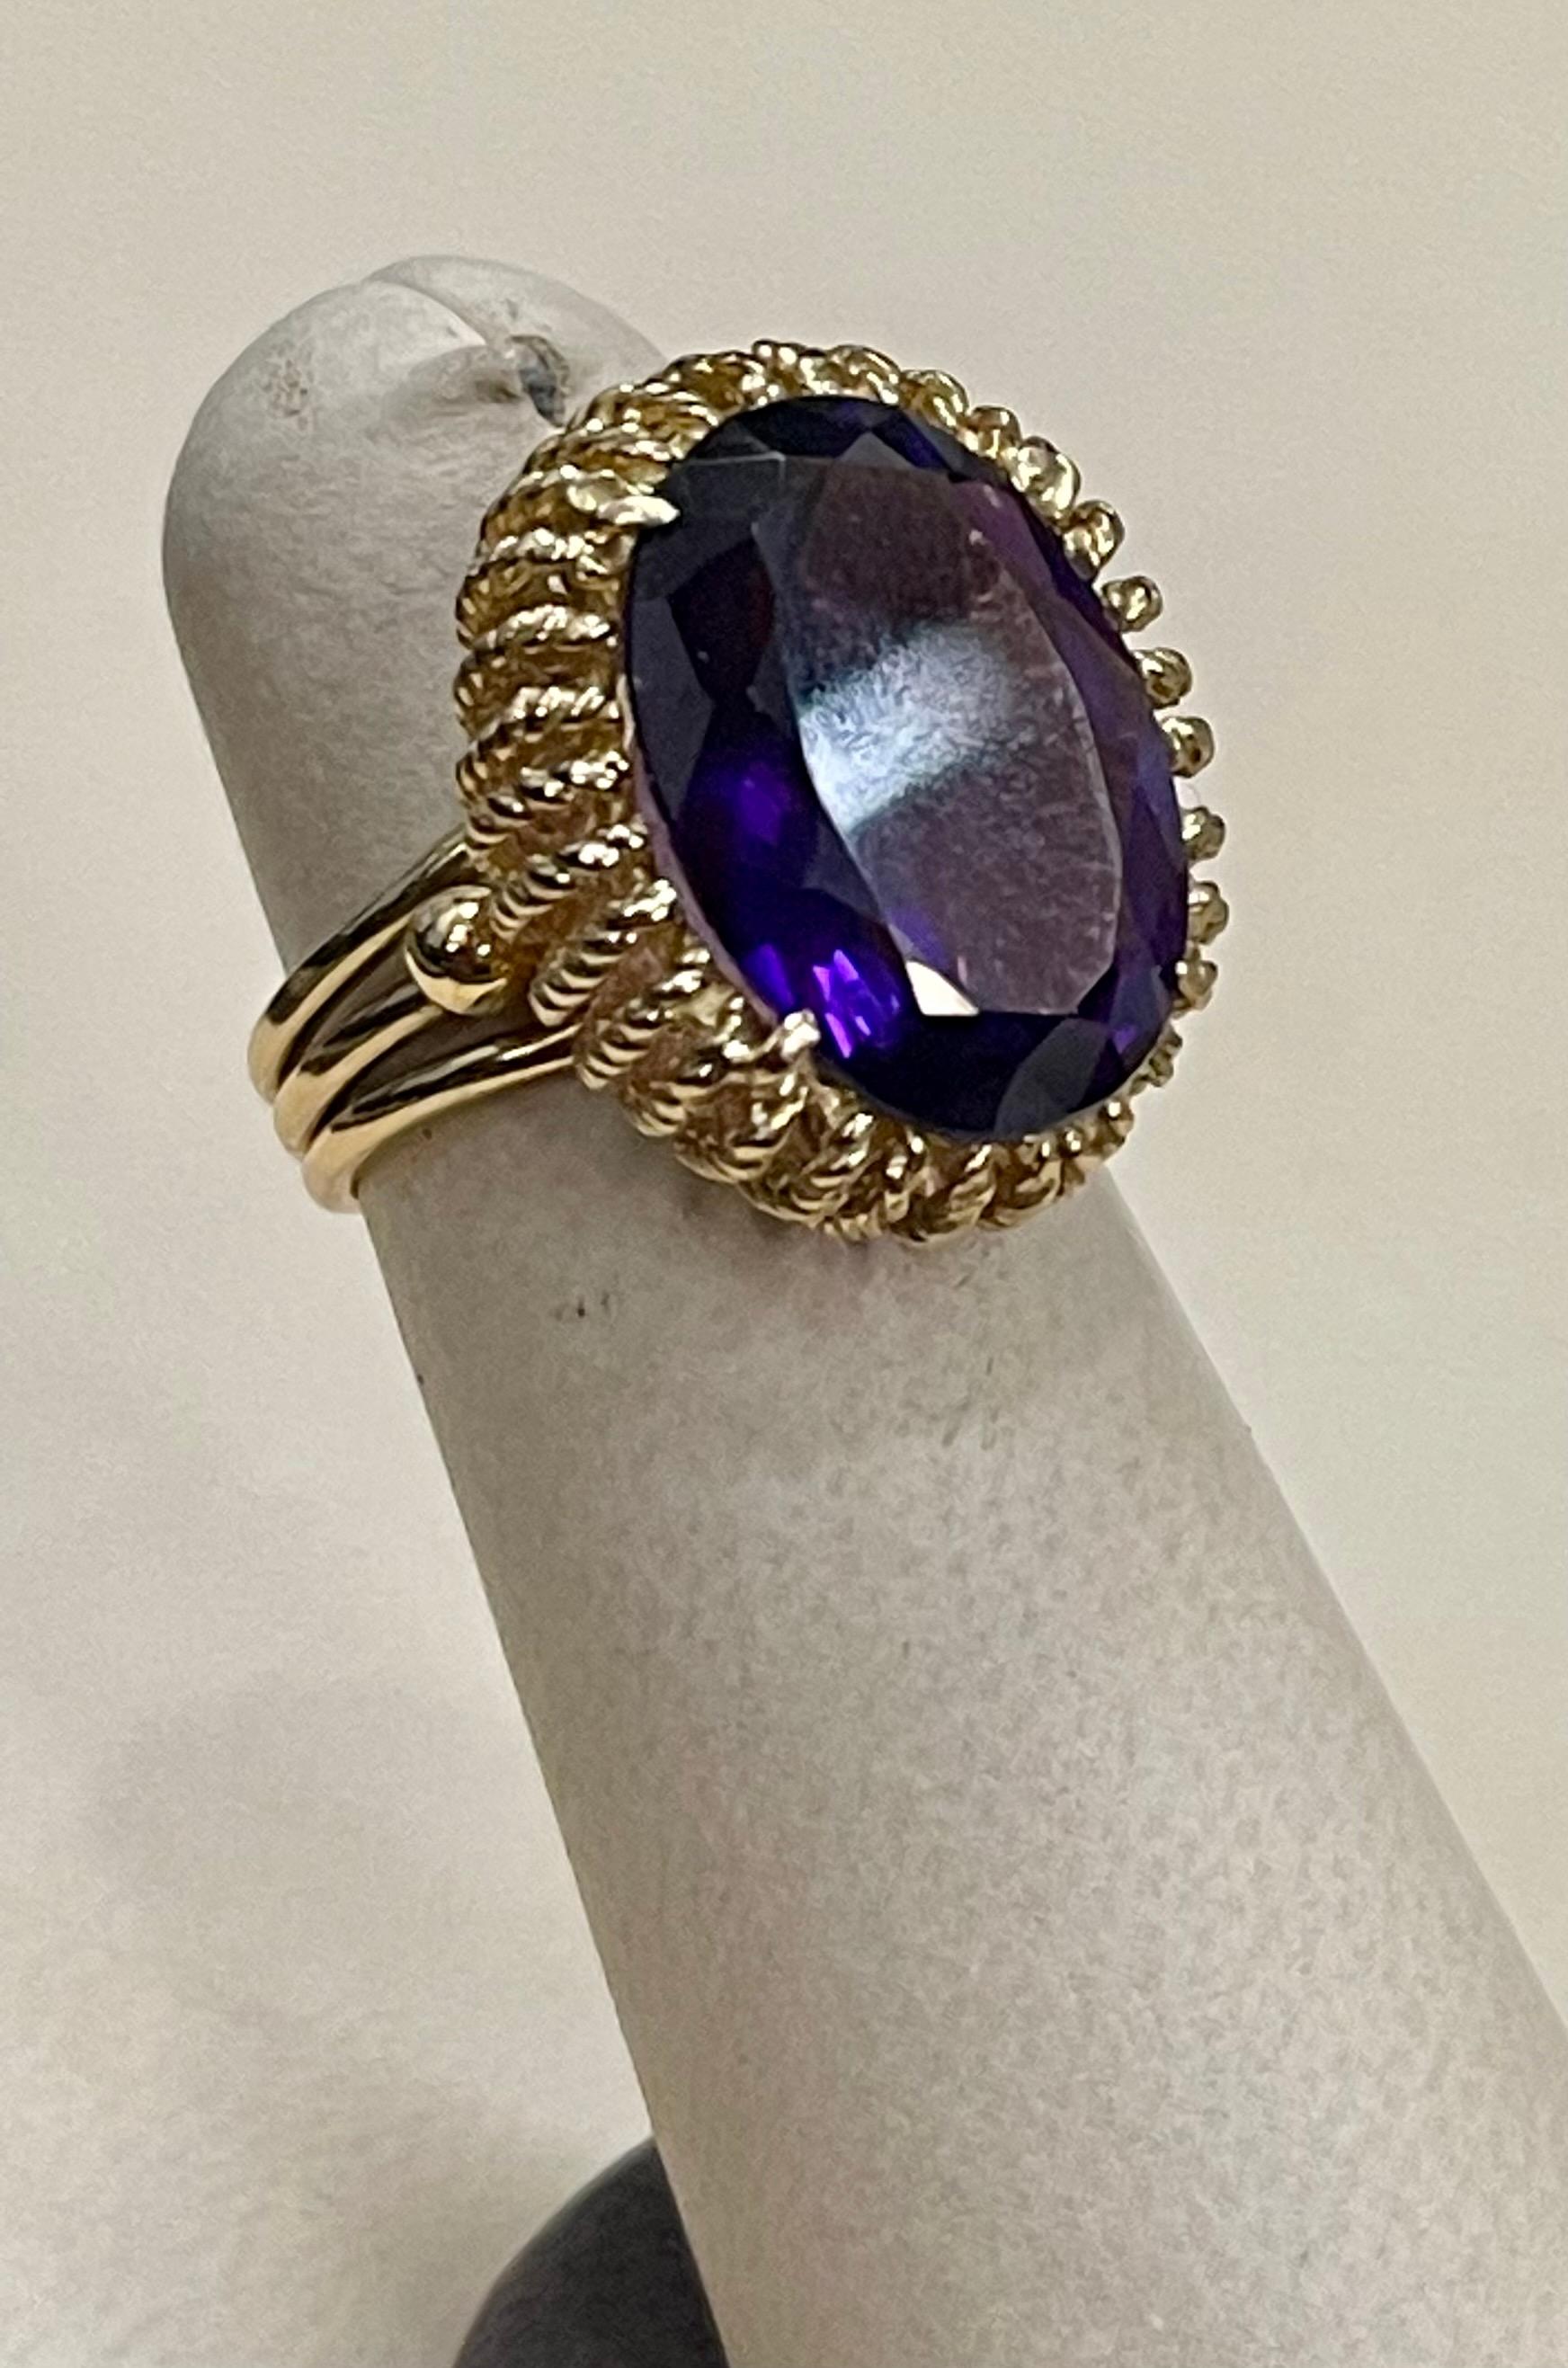 13 Carat Natural Oval Amethyst Cocktail Ring in 18 Karat Yellow Gold ...